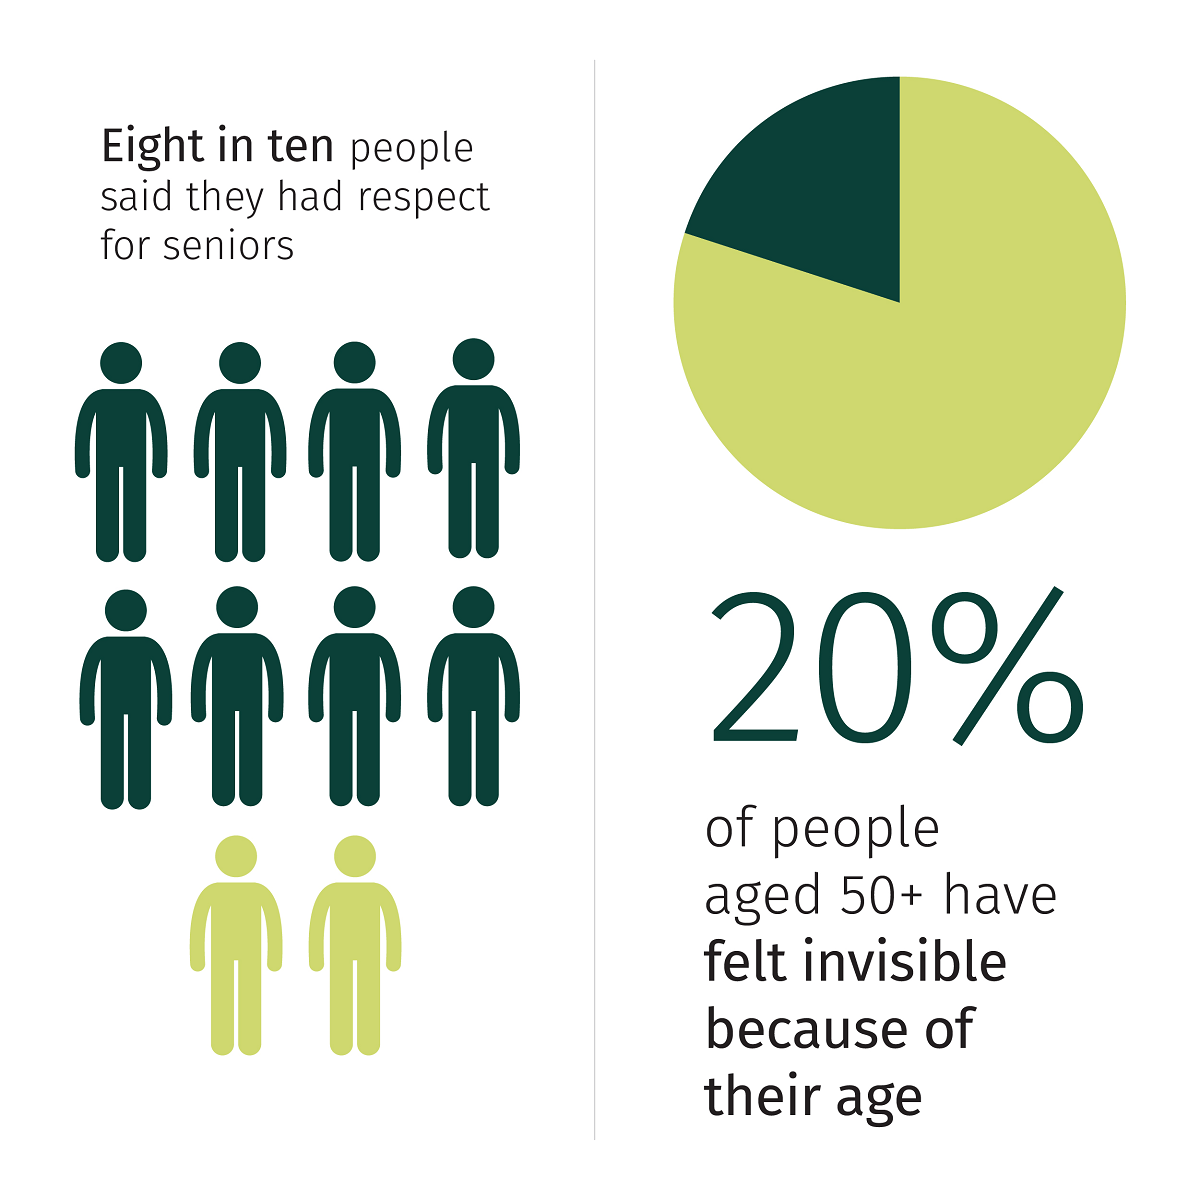 Eight in ten people said they had respect for seniors. 20% of people aged 50+ have felt invisible because of their age.